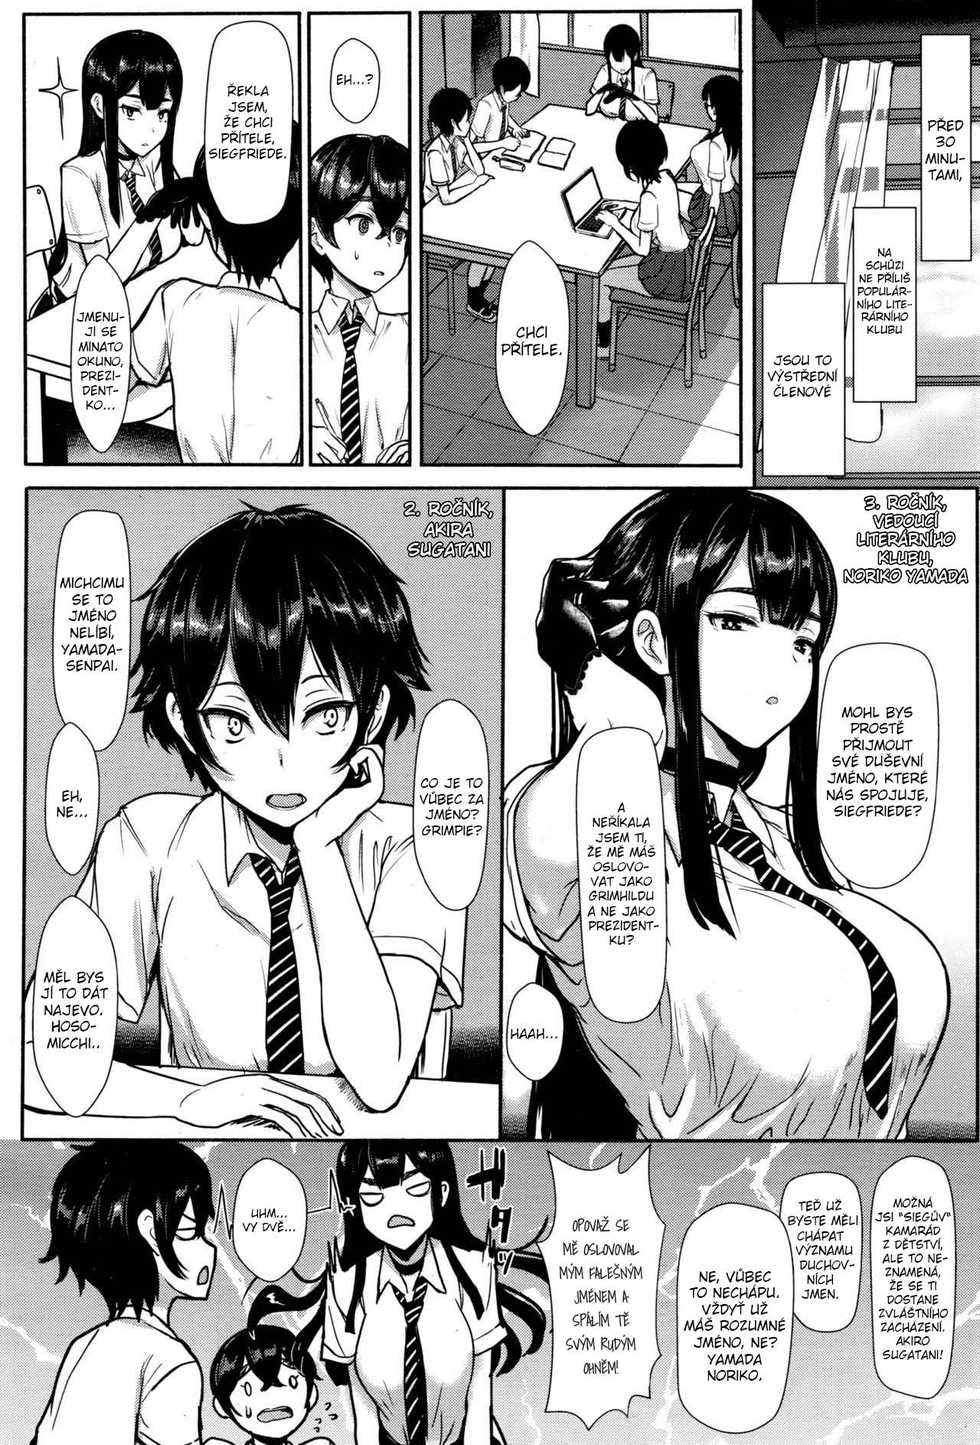 [Miyamoto Issa] Hikage no Sono e Youkoso | Welcome to the Shadow Garden (Girls forM Vol. 12) [Czech] [Heart♥] - Page 2